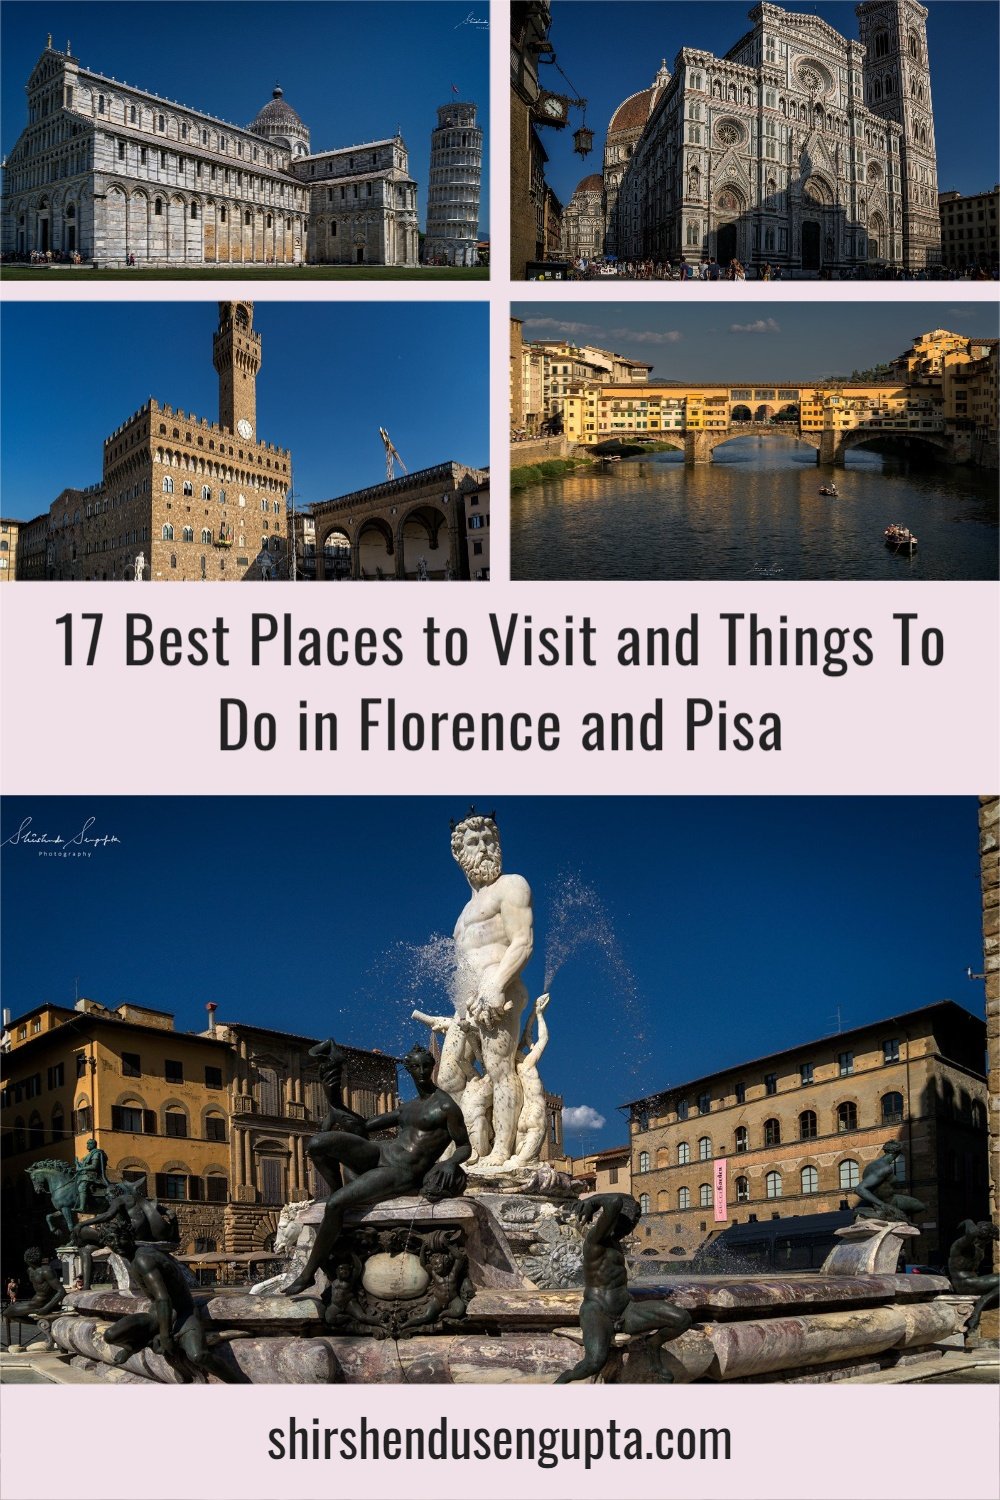 pinterest pin 17 Best Places to Visit and Things To Do in Florence and Pisa